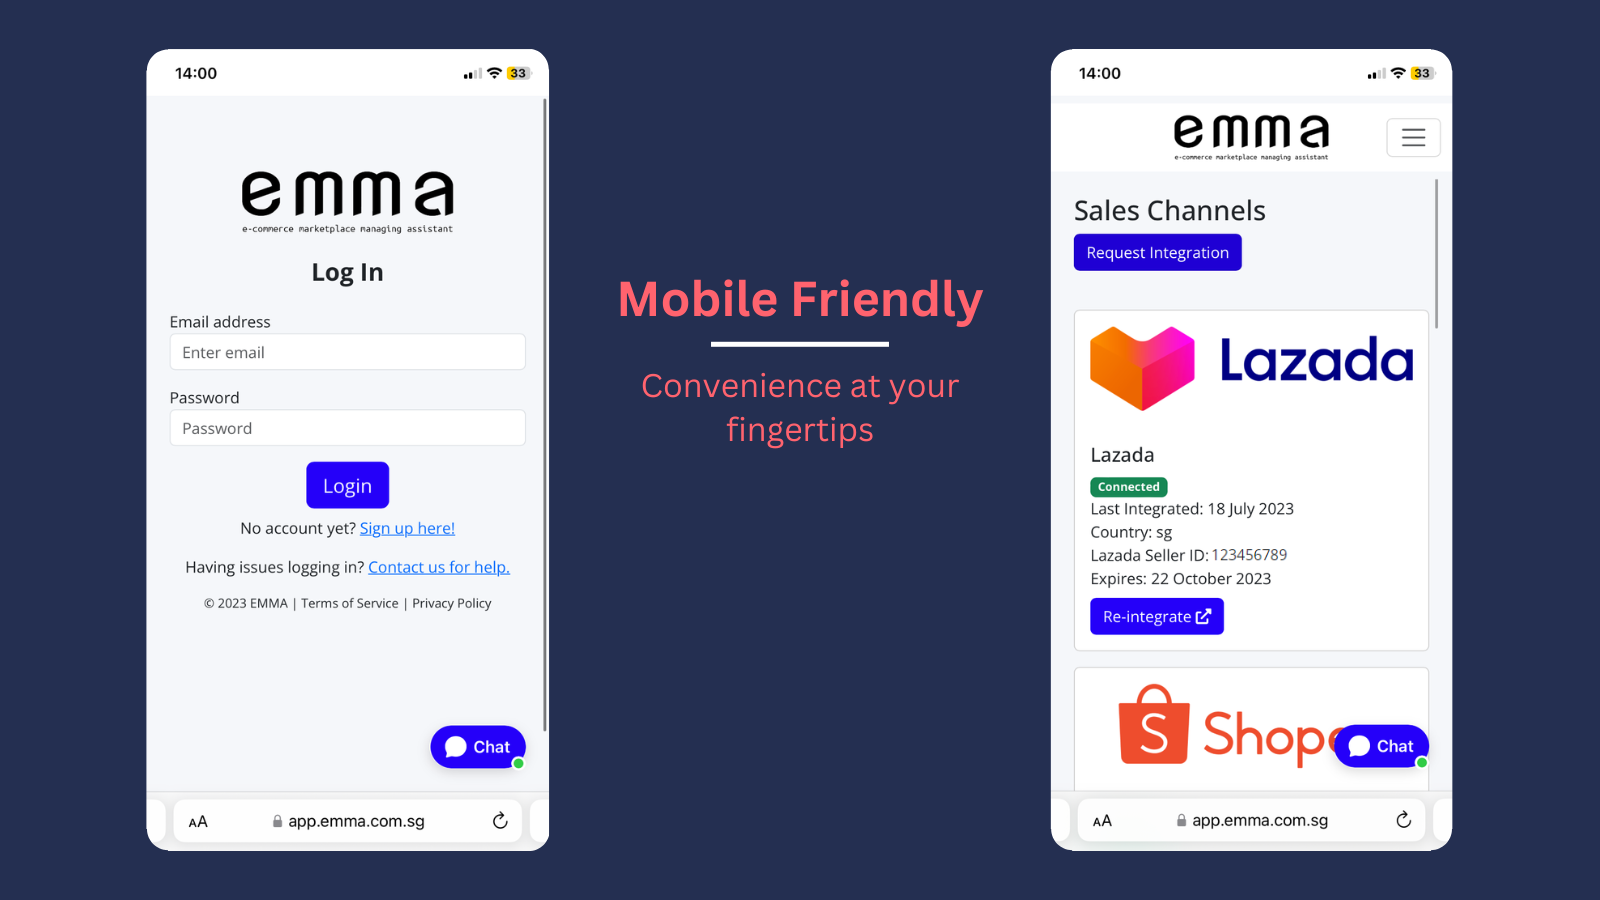 Mobile Friendly - Convenience at your fingertips